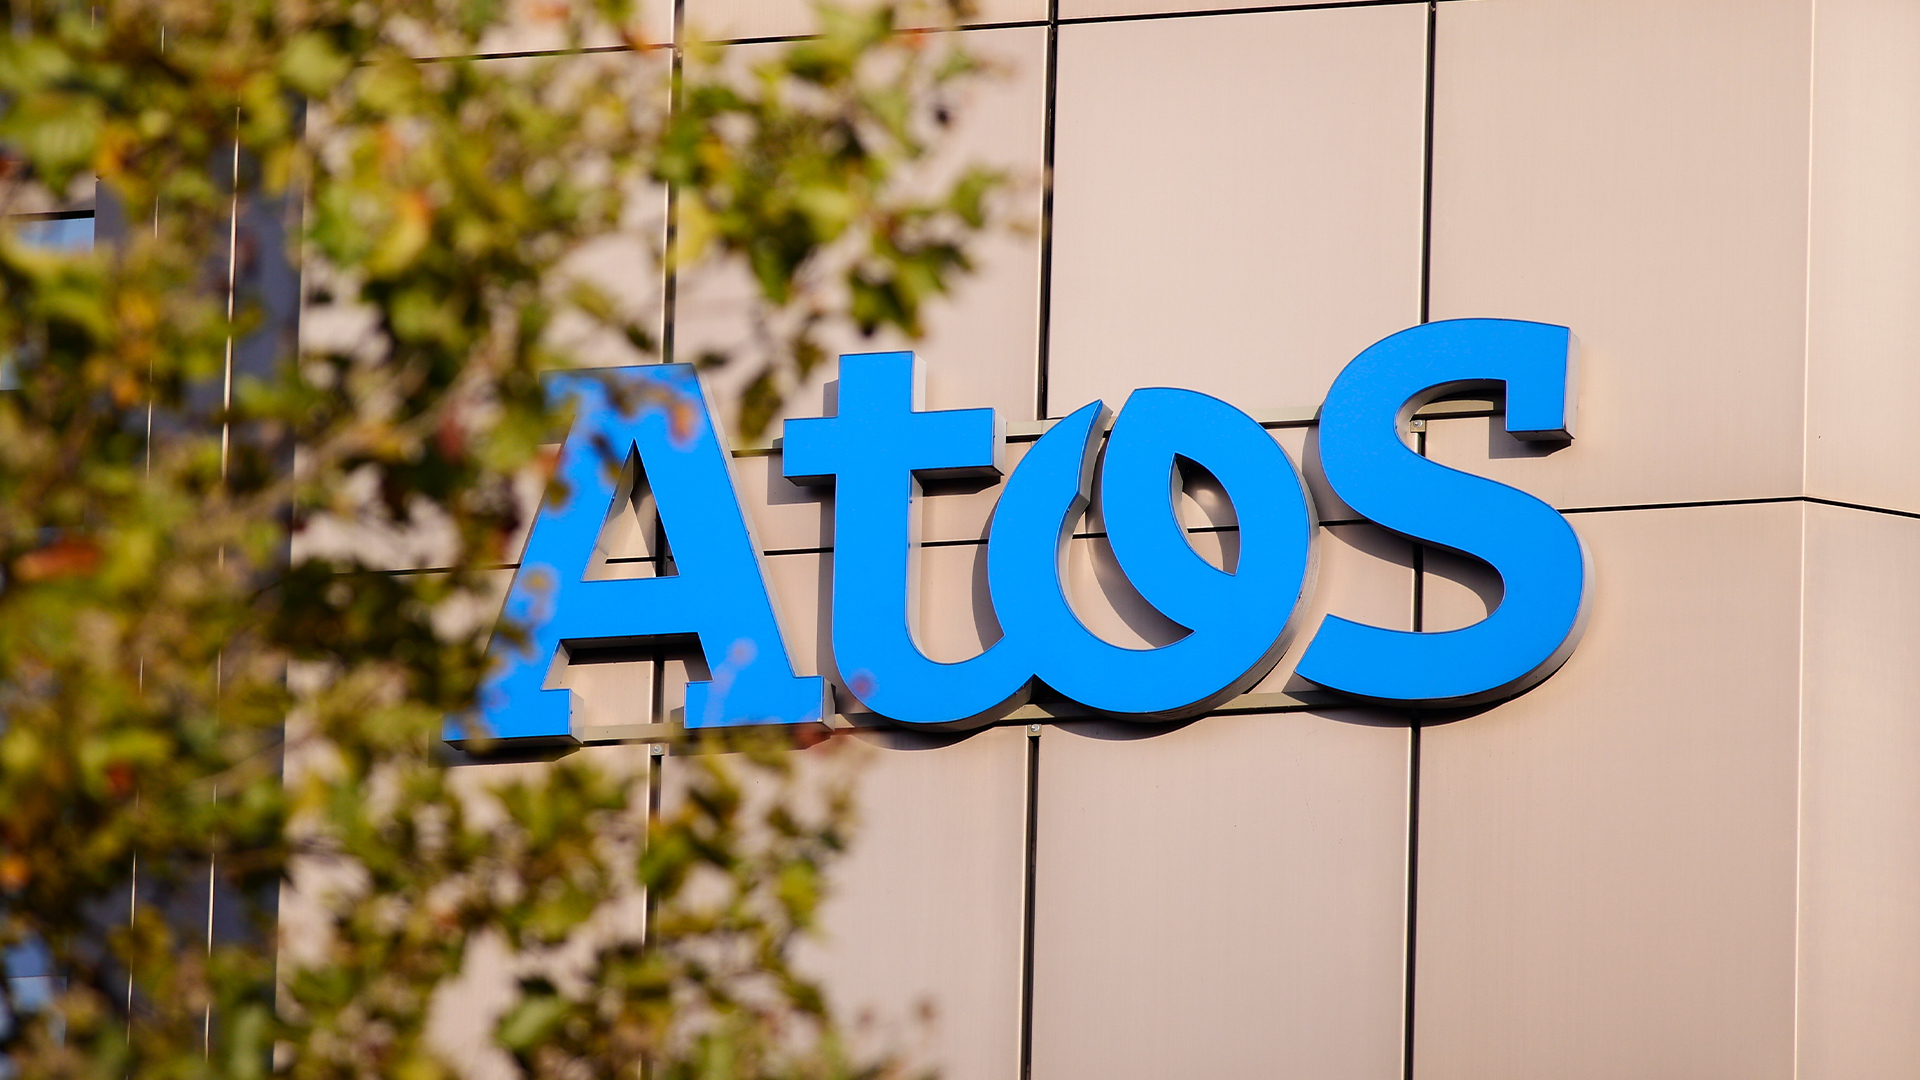 What is happening with Atos?